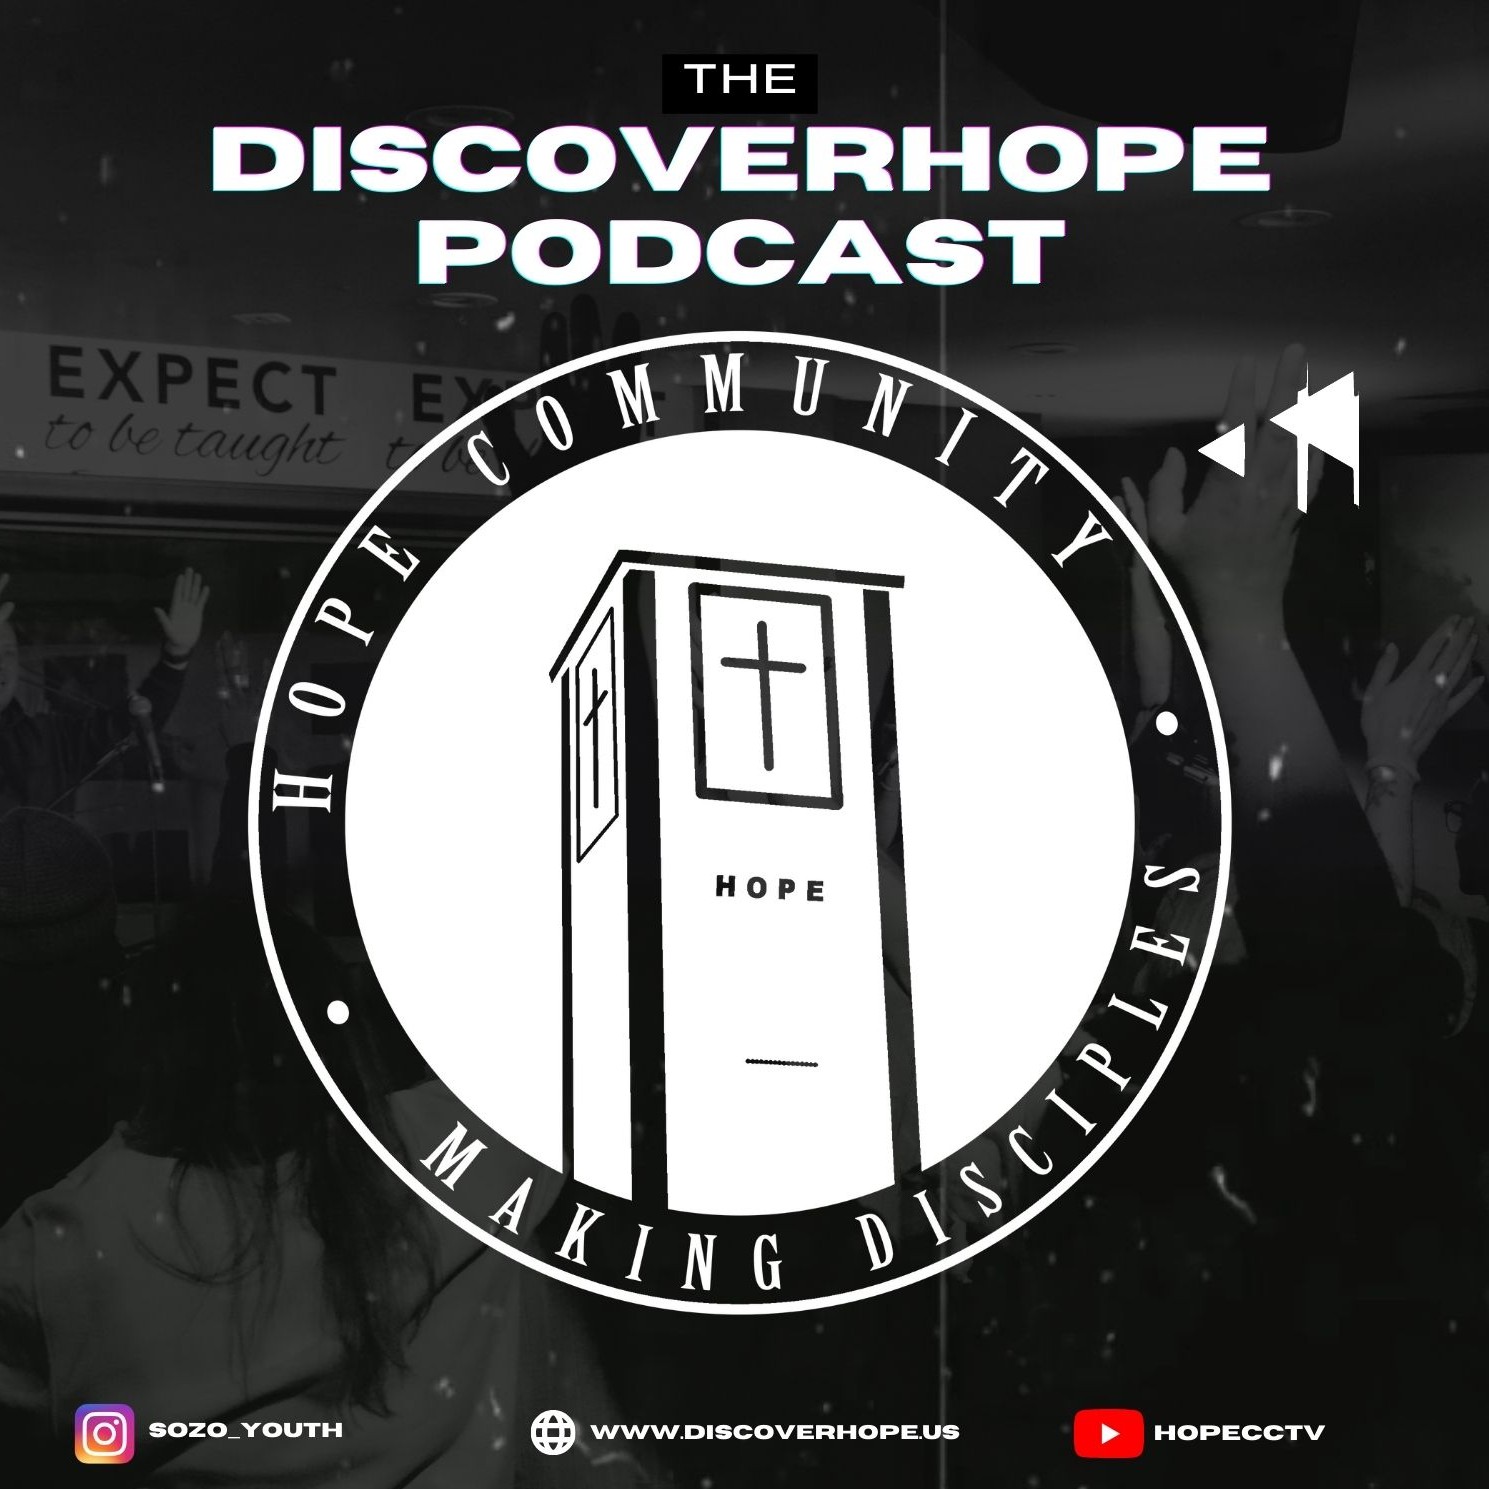 The Discoverhope Podcast